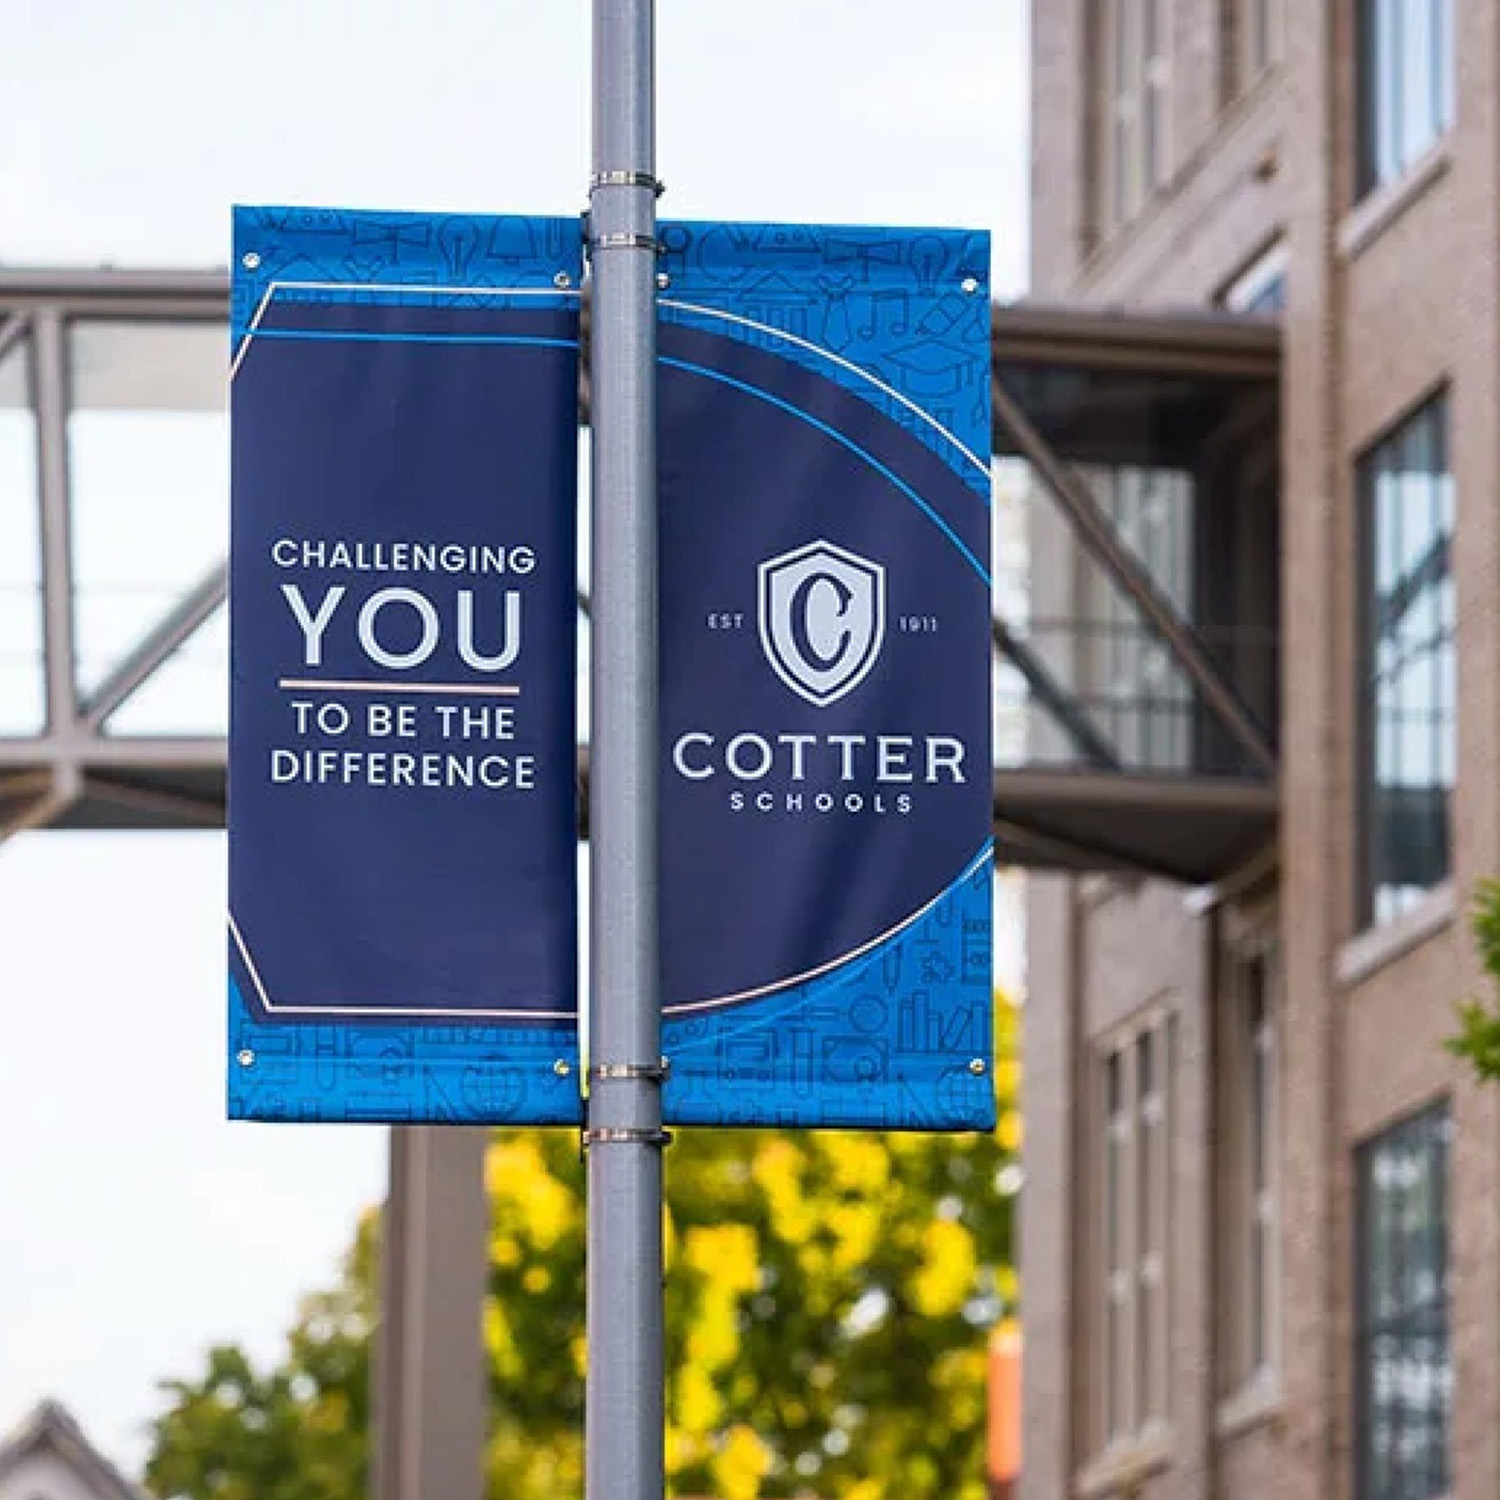 Cotter Schools lamp post banners